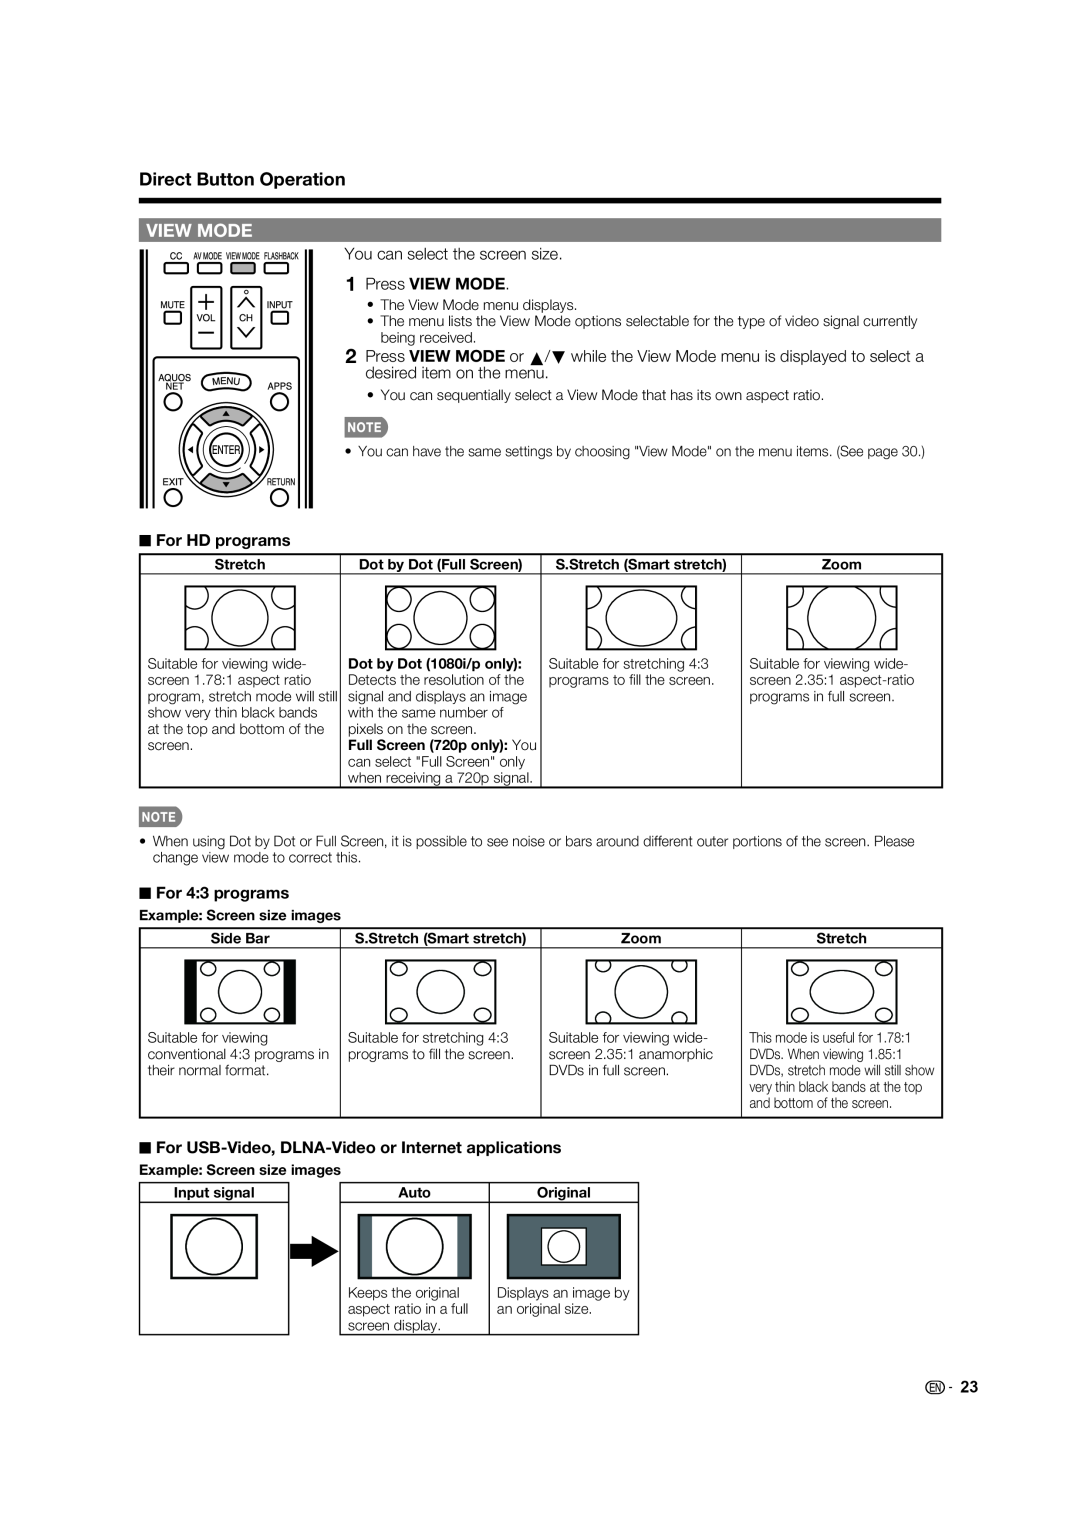 Sharp LC-70LE734U operation manual View Mode, Press VIEW MODE, For HD programs, For 43 programs, Direct Button Operation 